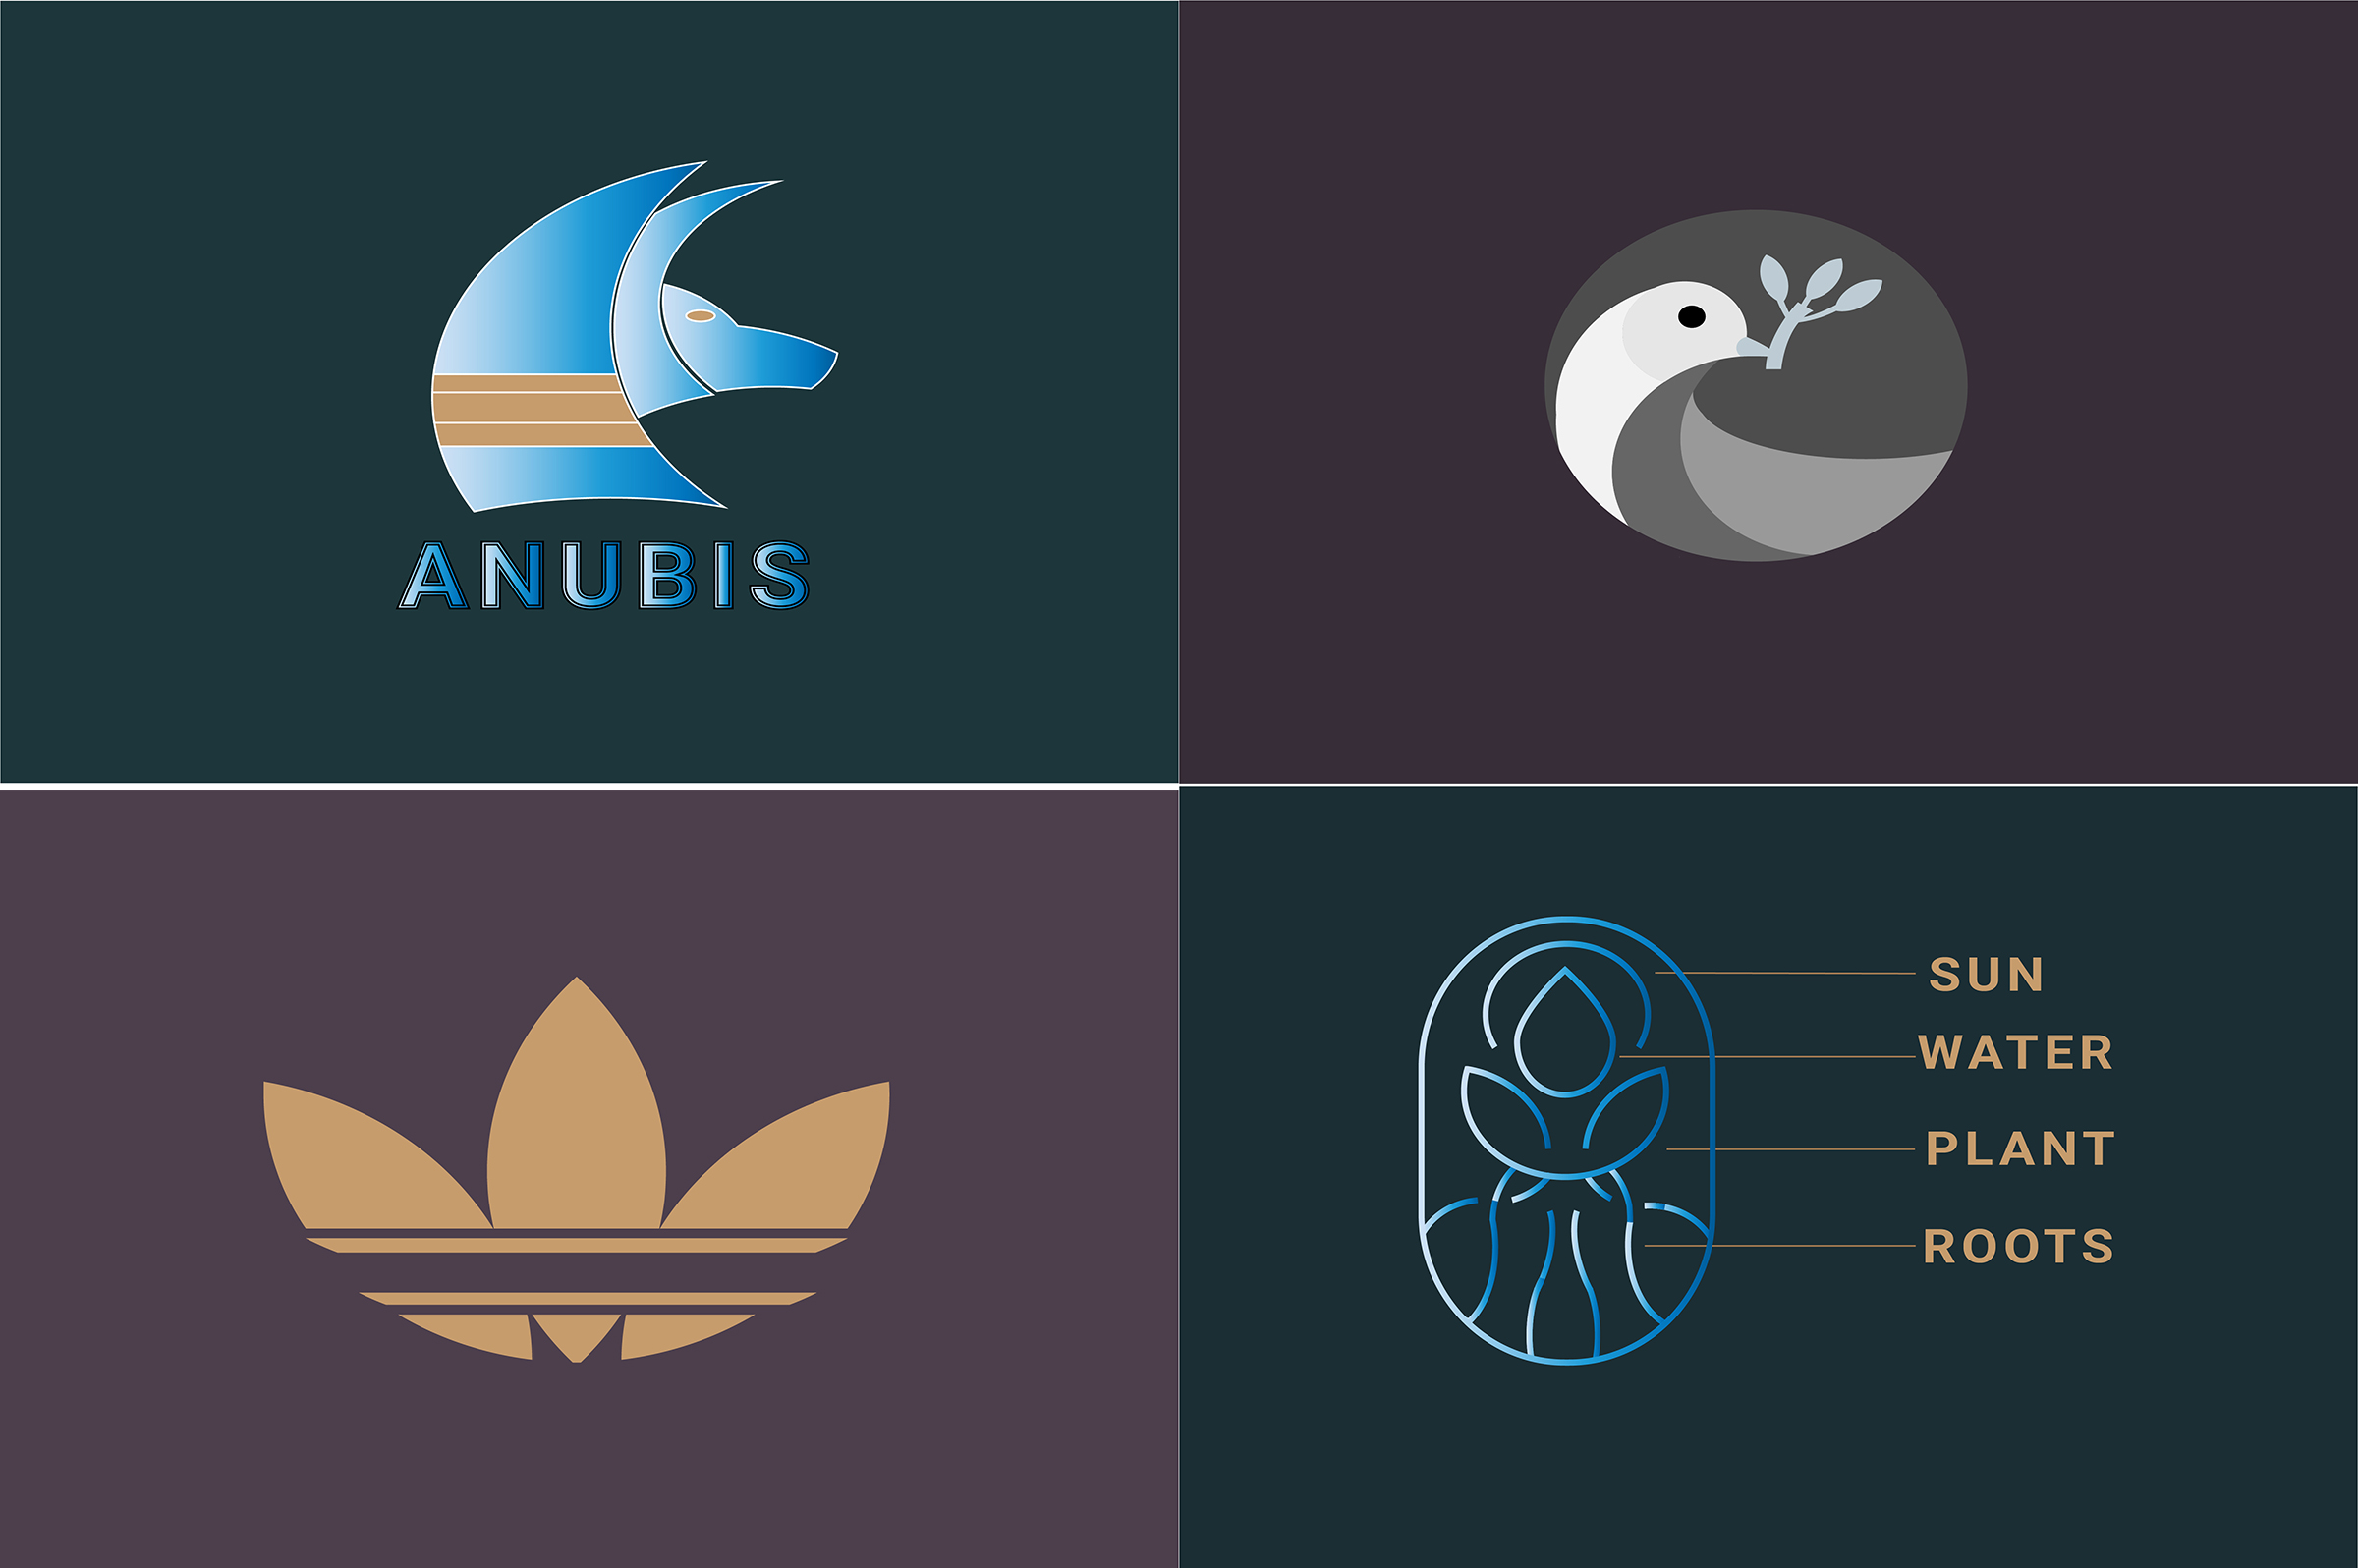 design-minimalist-and-simple-logo-and-graphics-for-5-seoclerks